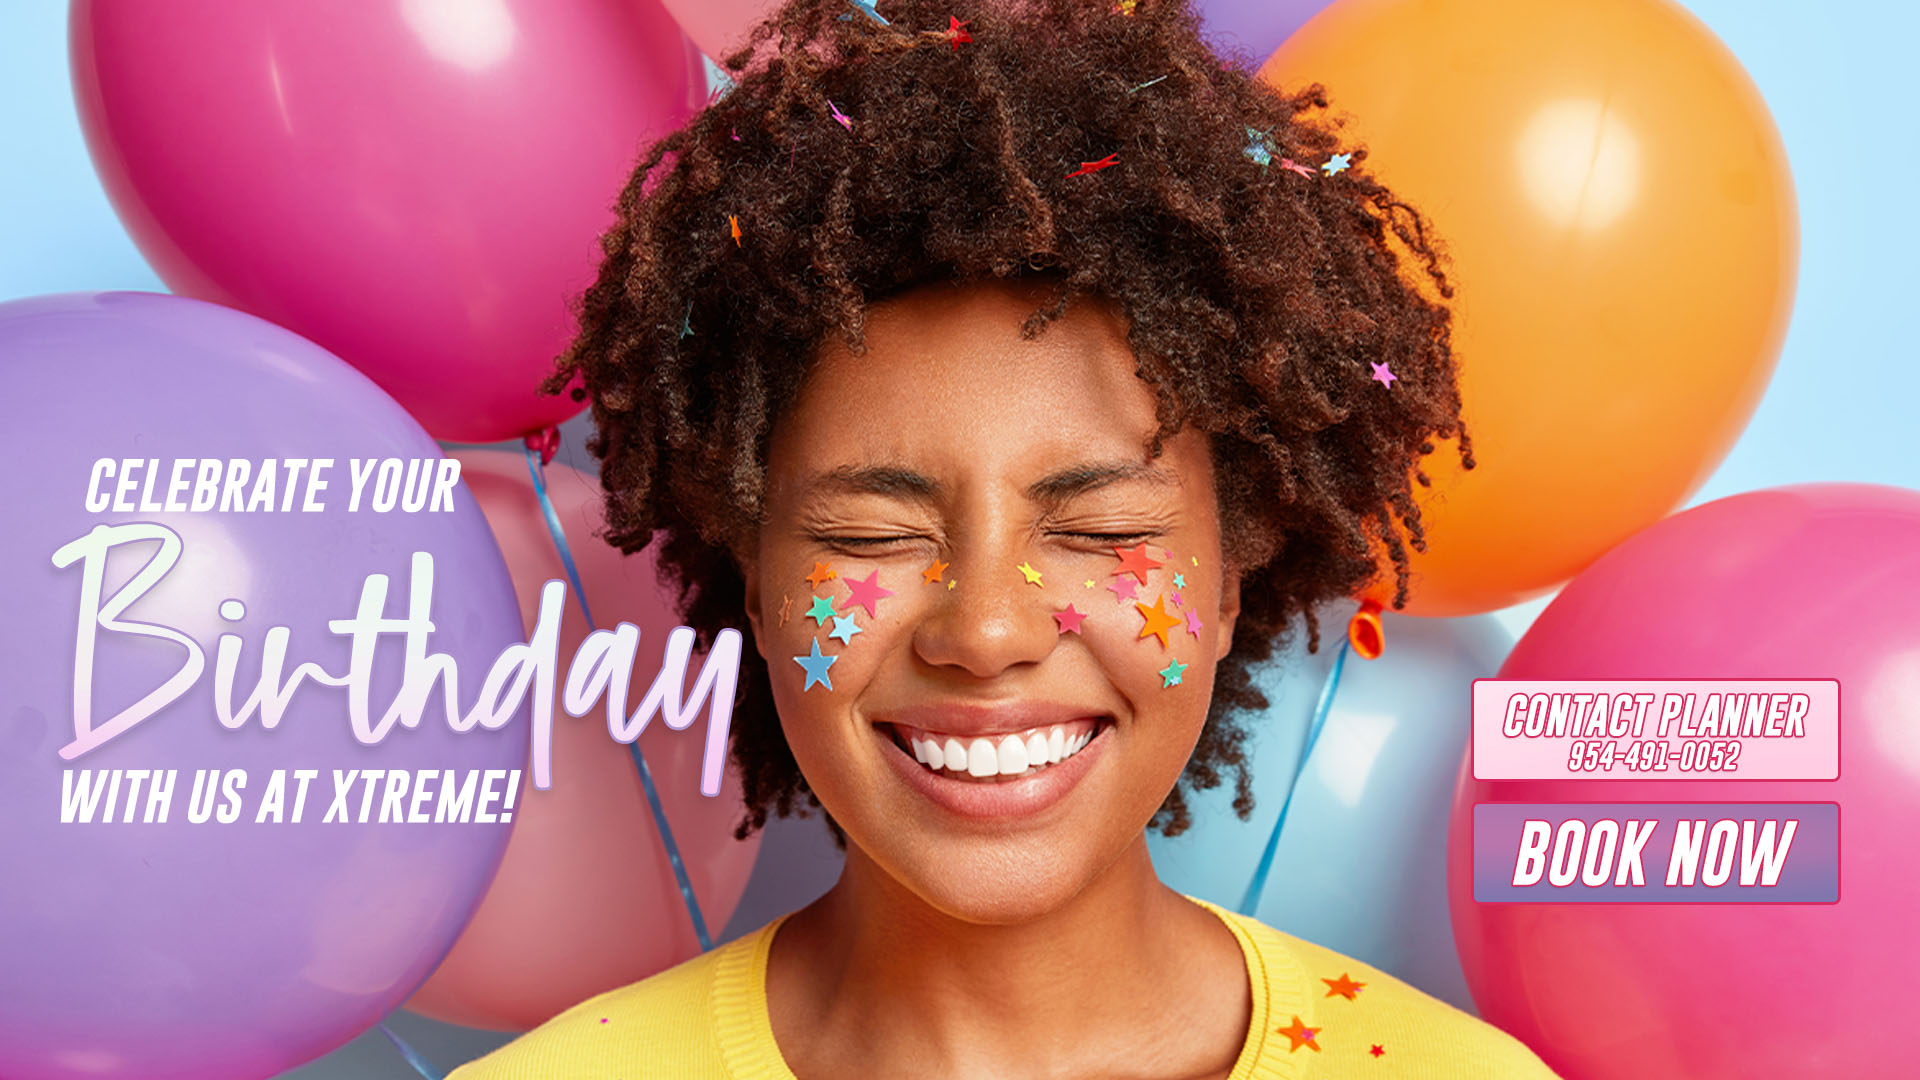 Celebrate your birthday with us at Xtreme. Contact a planner to hear about our fun activities for you and your loved ones!